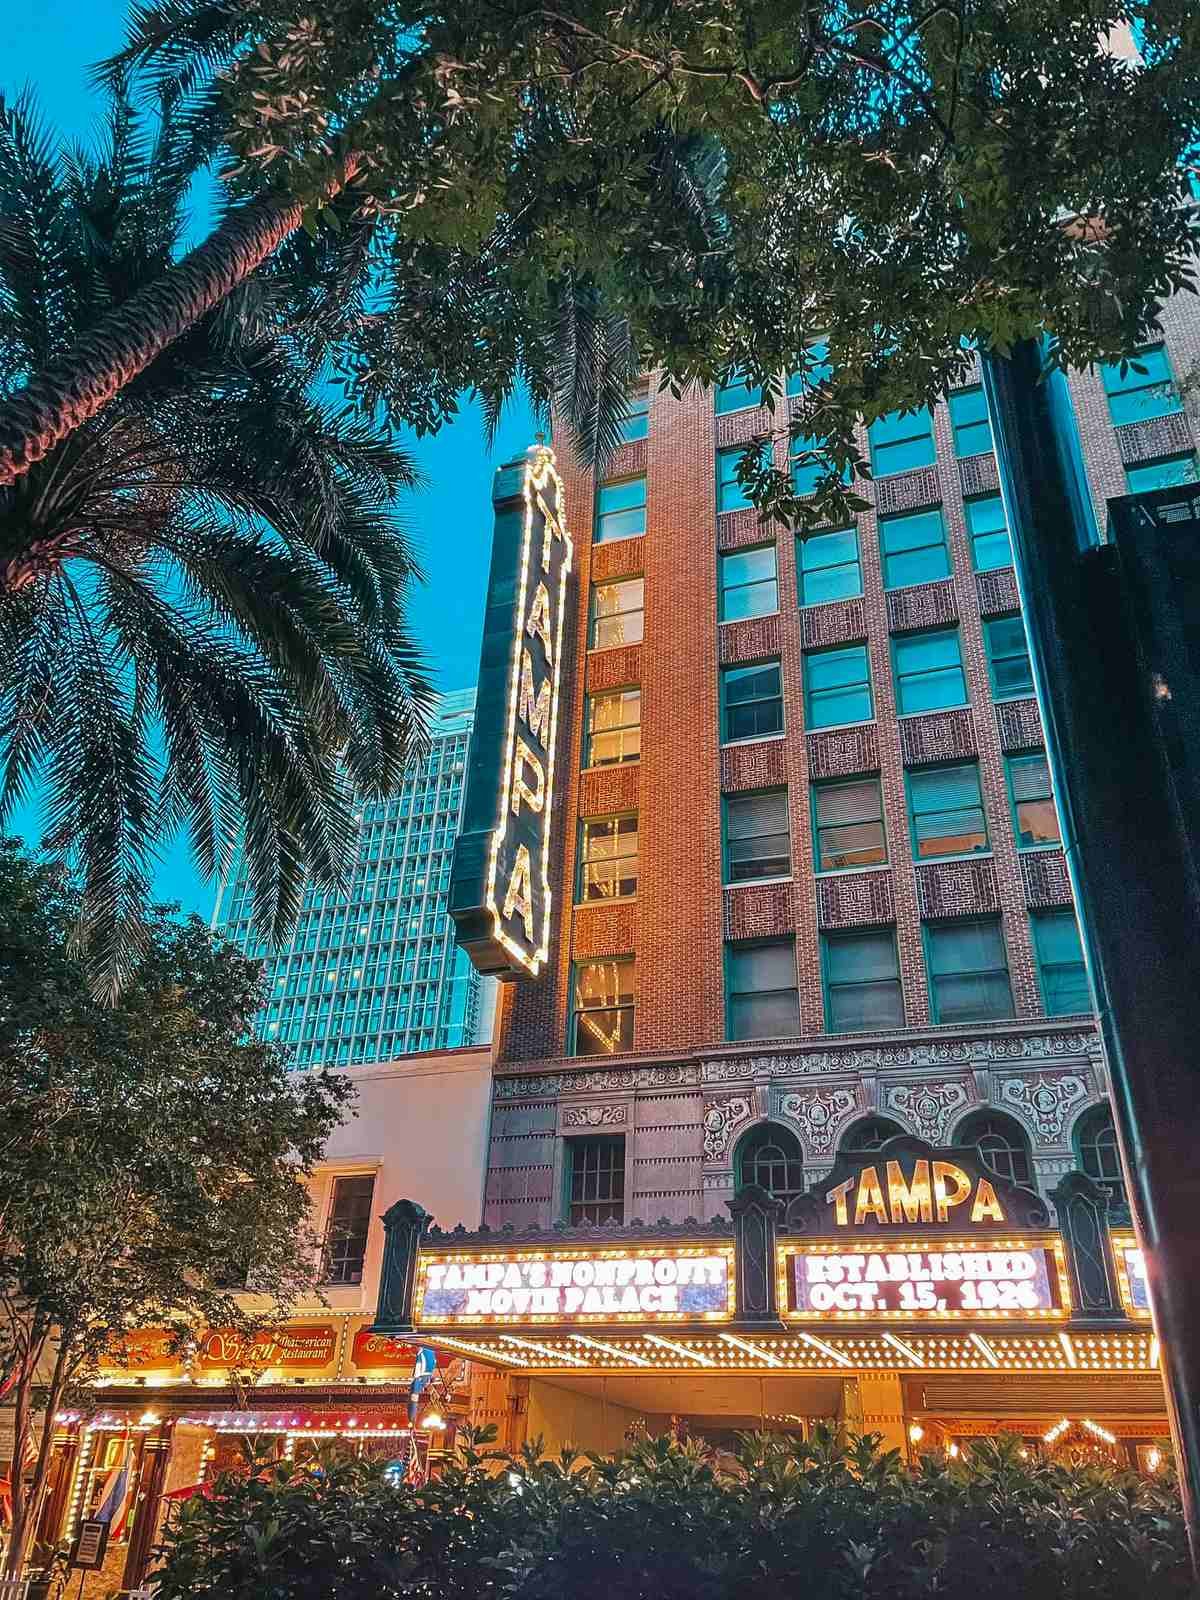 Tampa Theatre sign at dusk